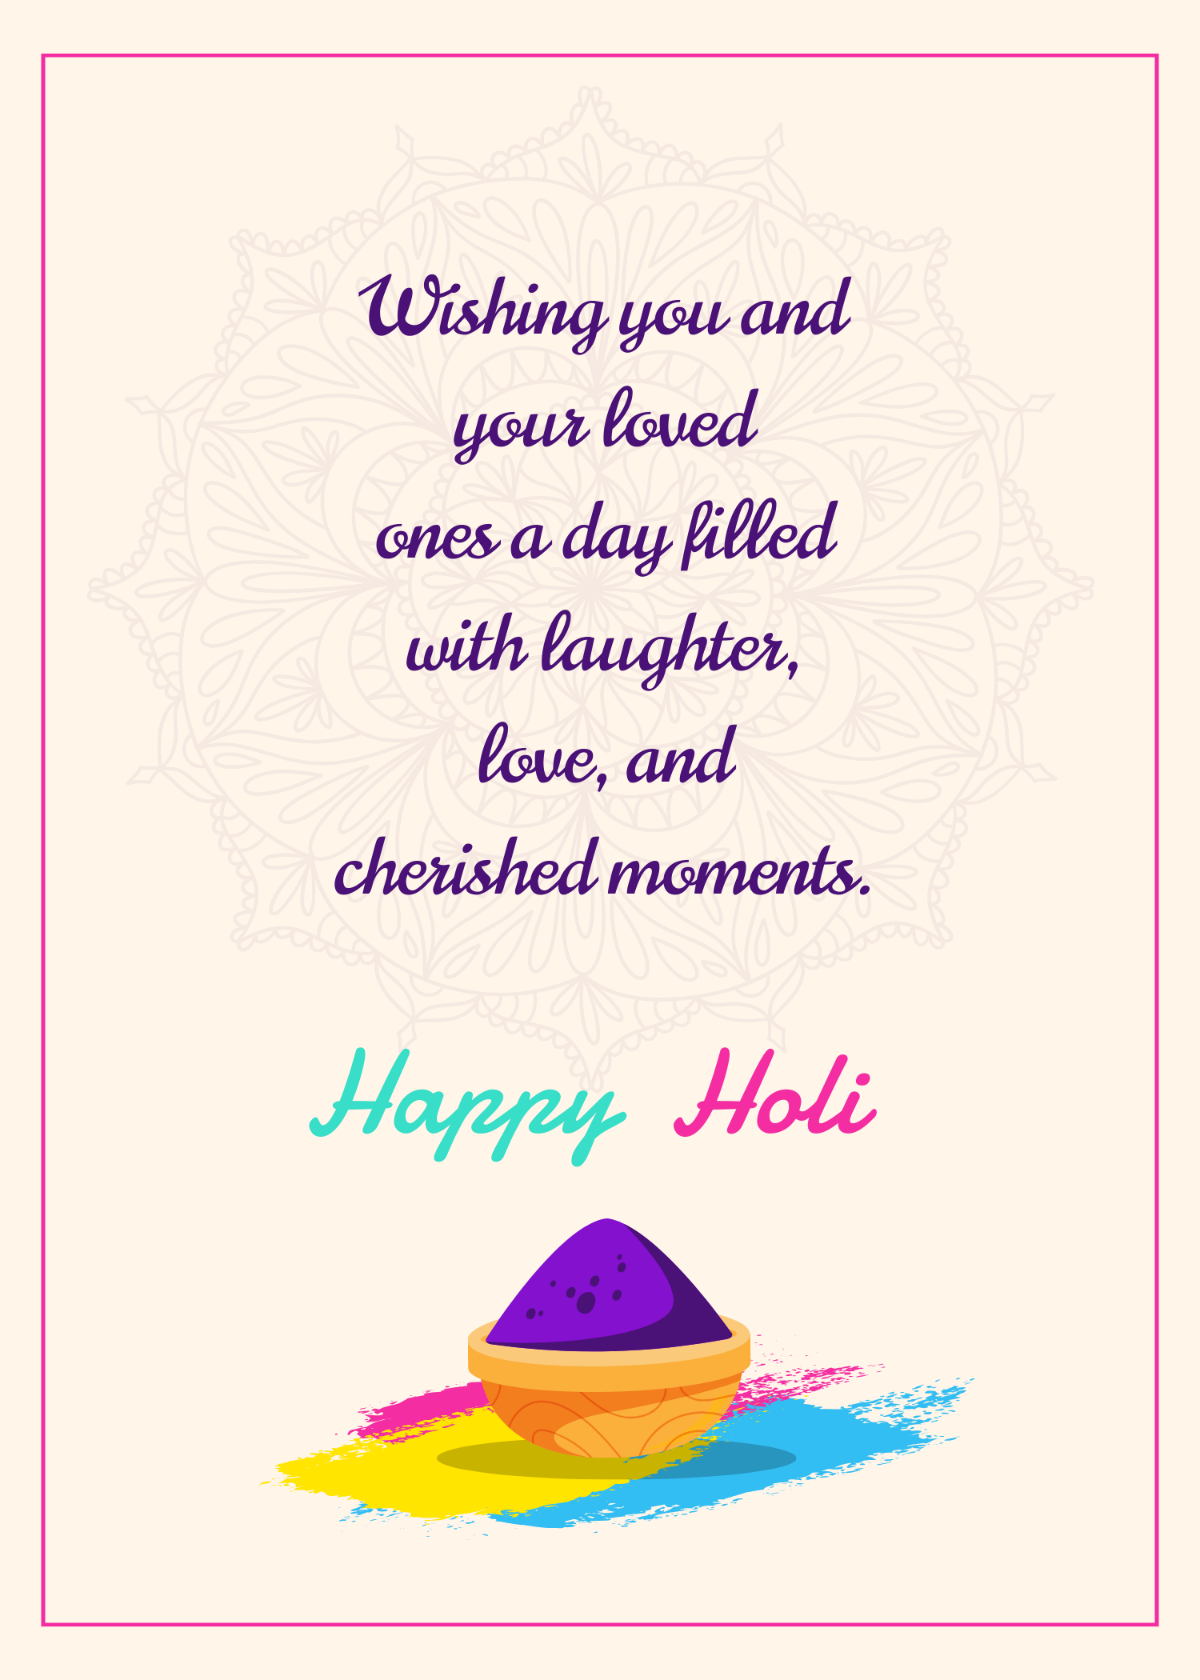 Free Holi Festival Wishes Template